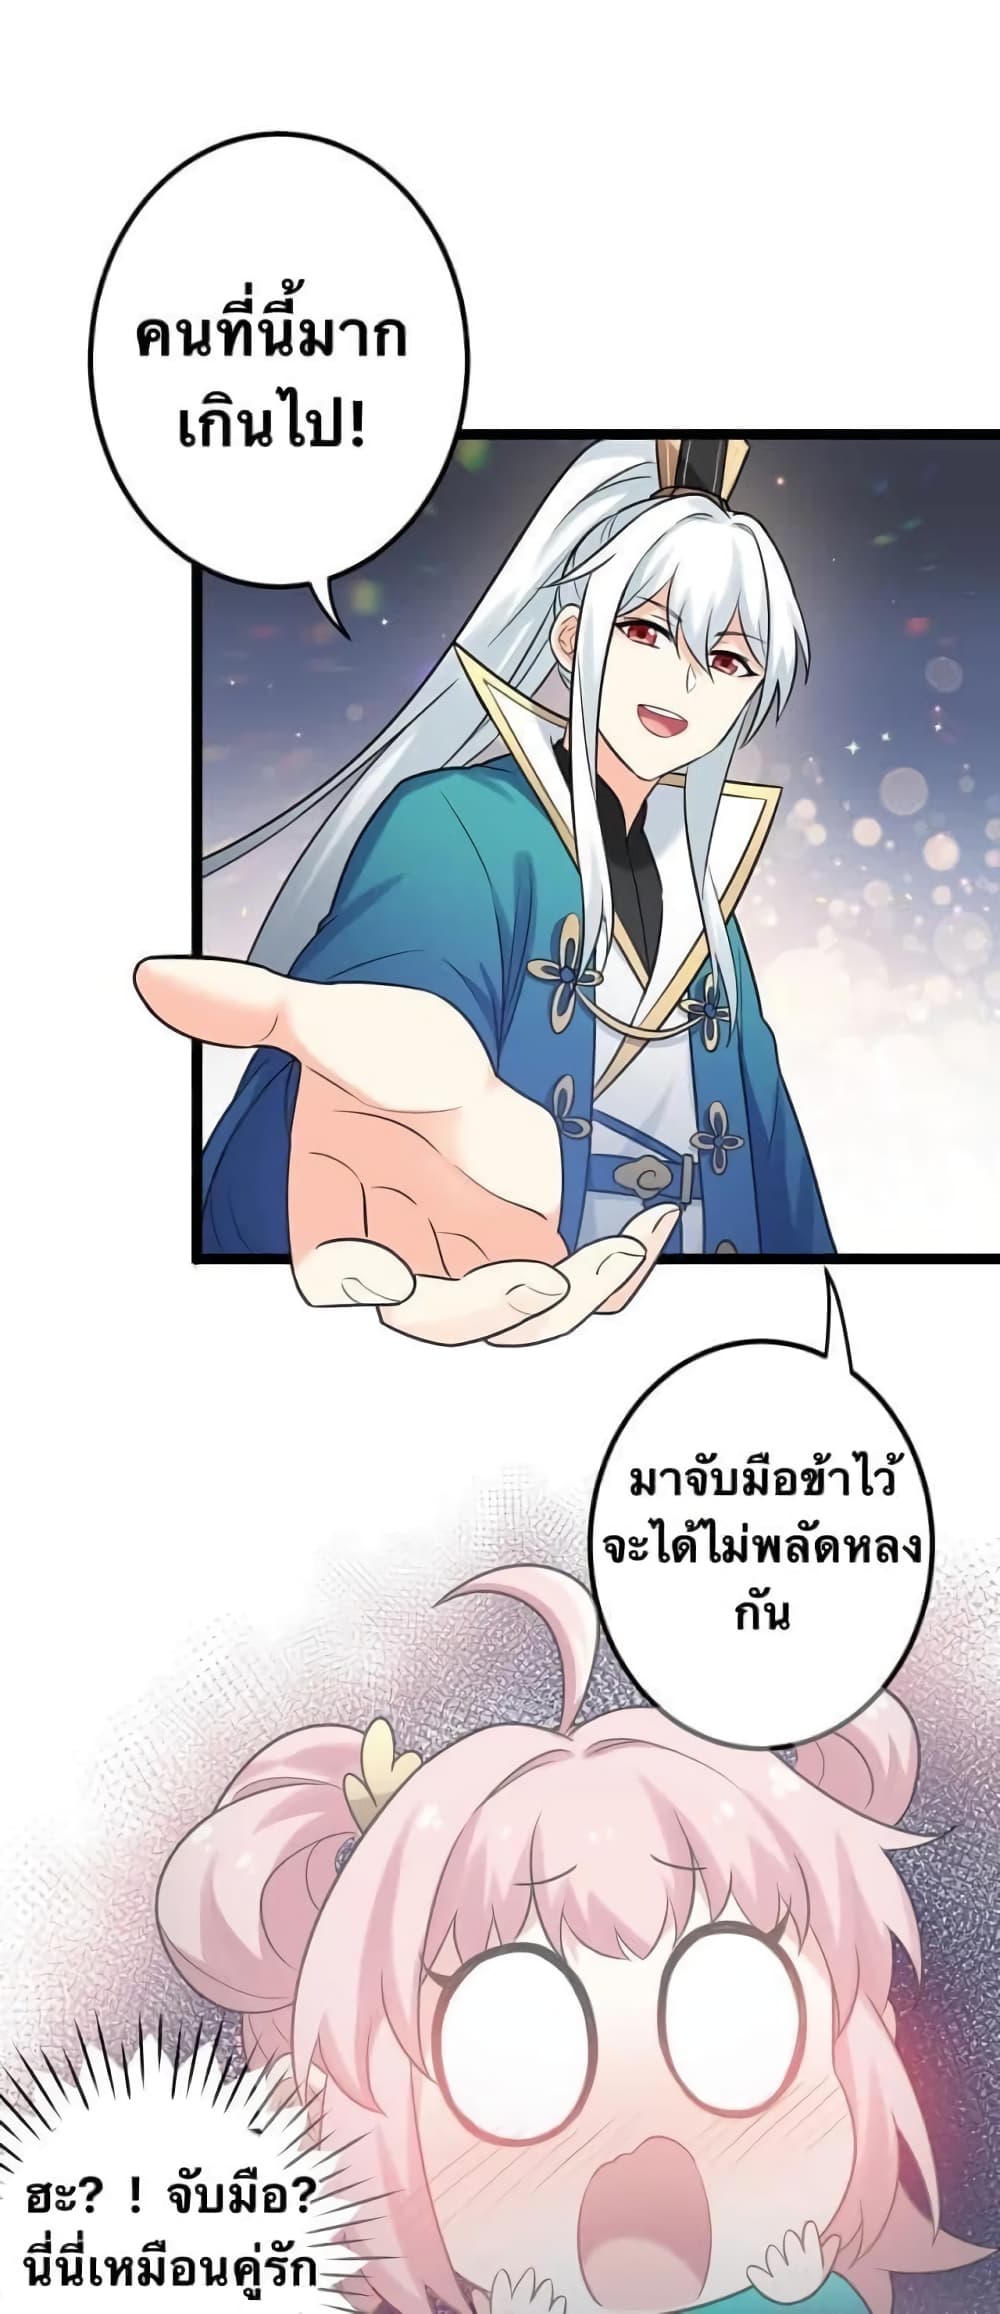 Godsian Masian from Another World 8 แปลไทย